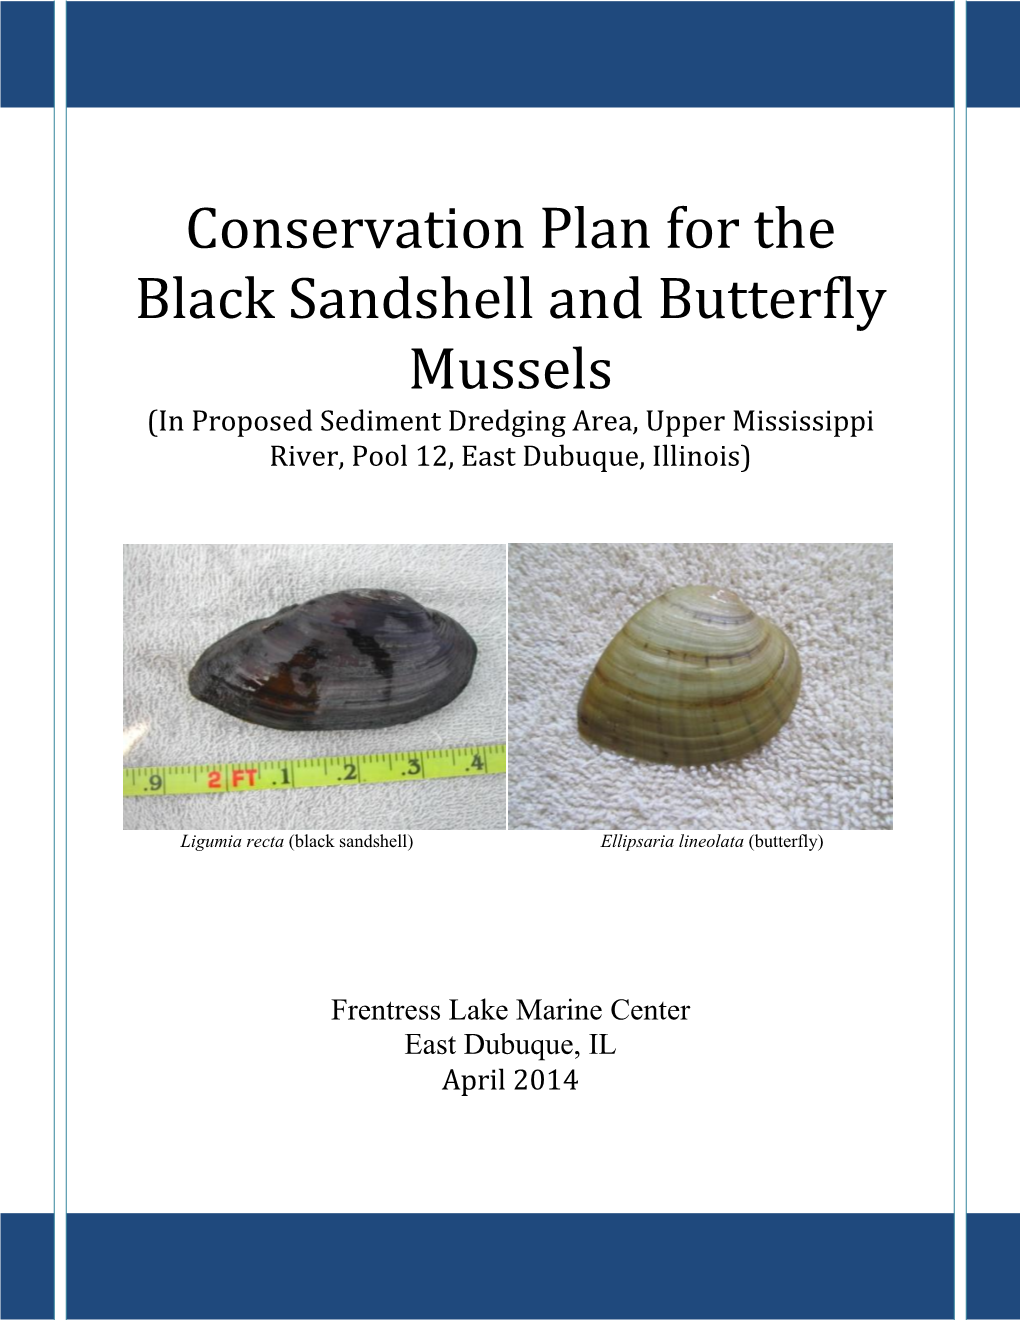 Conservation Plan for the Black Sandshell and Butterfly Mussels (In Proposed Sediment Dredging Area, Upper Mississippi River, Pool 12, East Dubuque, Illinois)